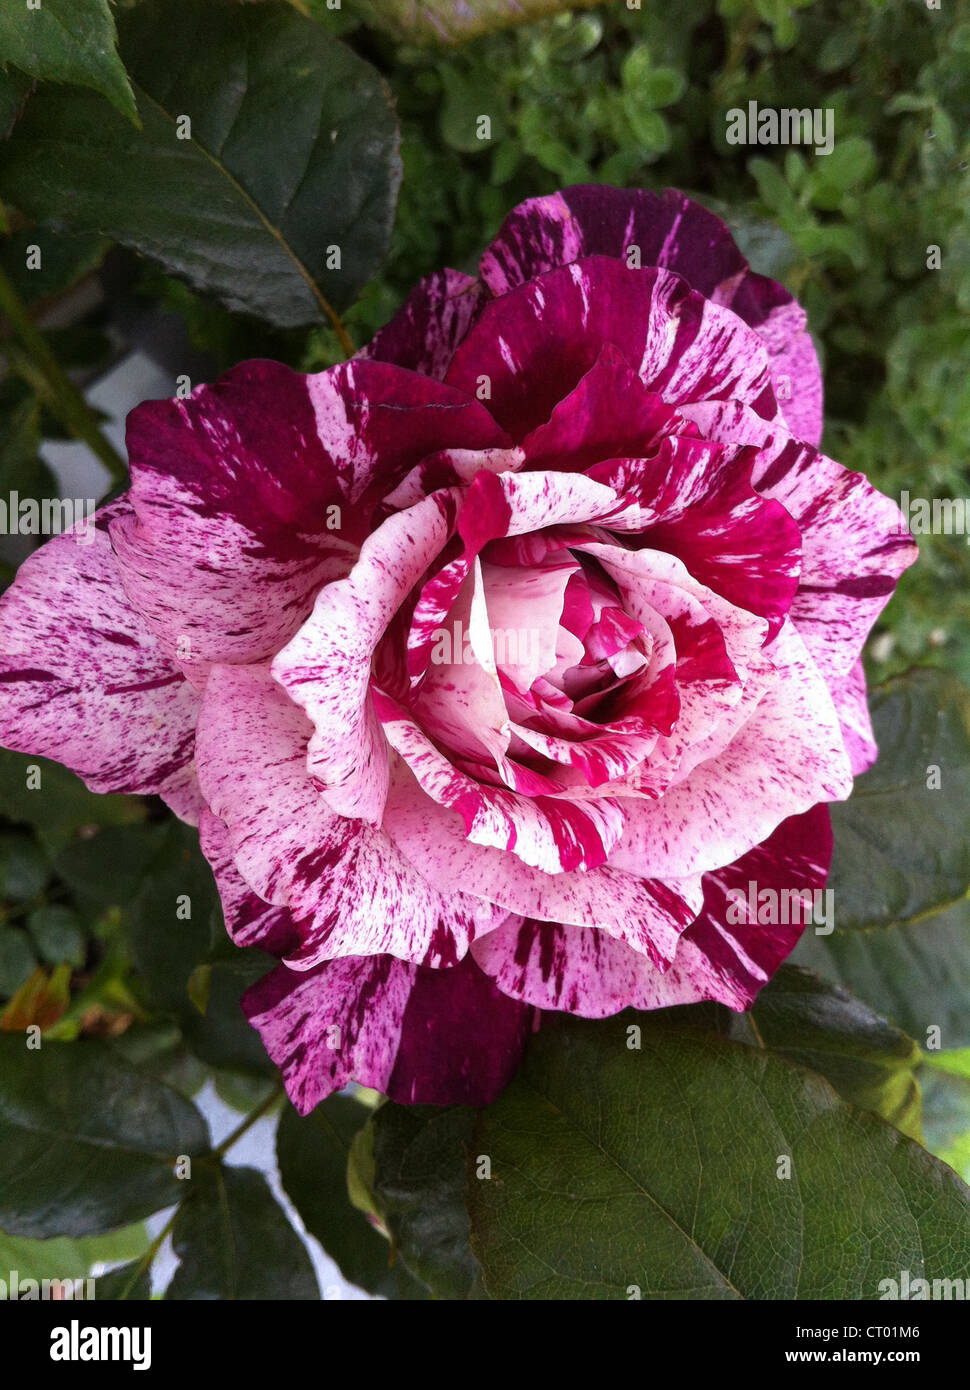 Purple/ pink/ white marbled rose flower macro on a natural green foliage back drop Stock Photo